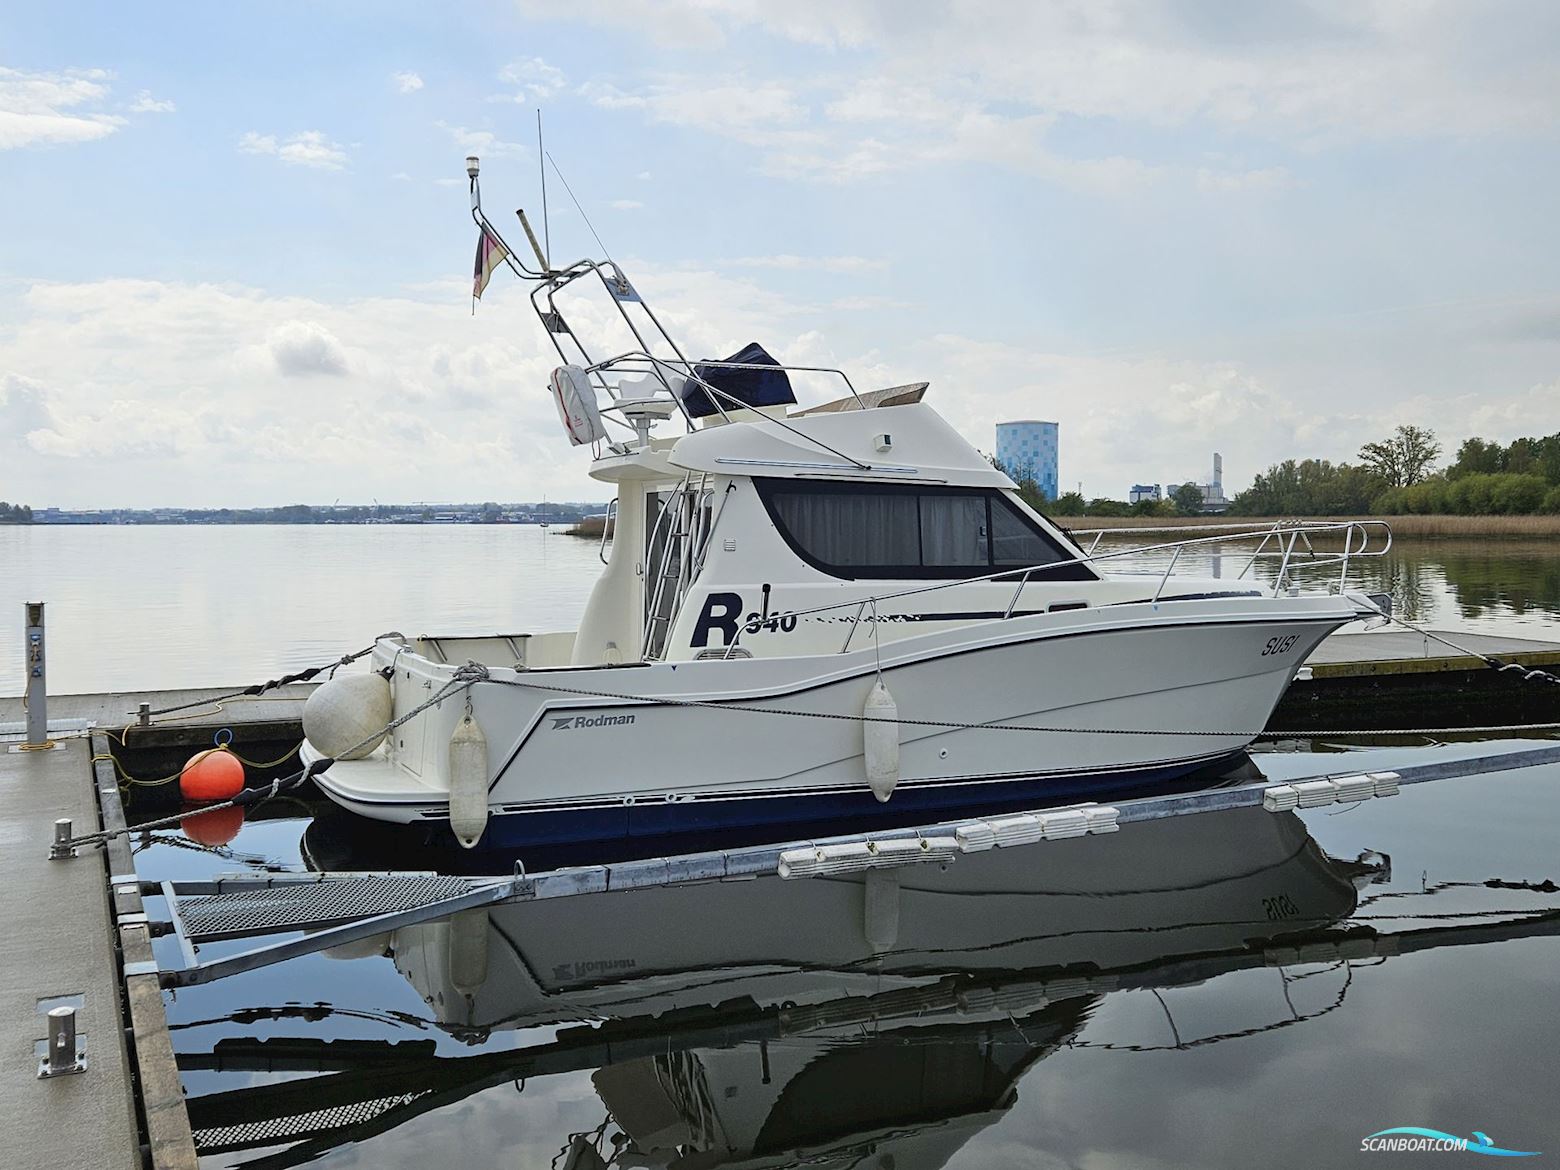 Rodman 940 Fly Motor boat 2007, with 2x Volvo D3 190 hp engine, Germany